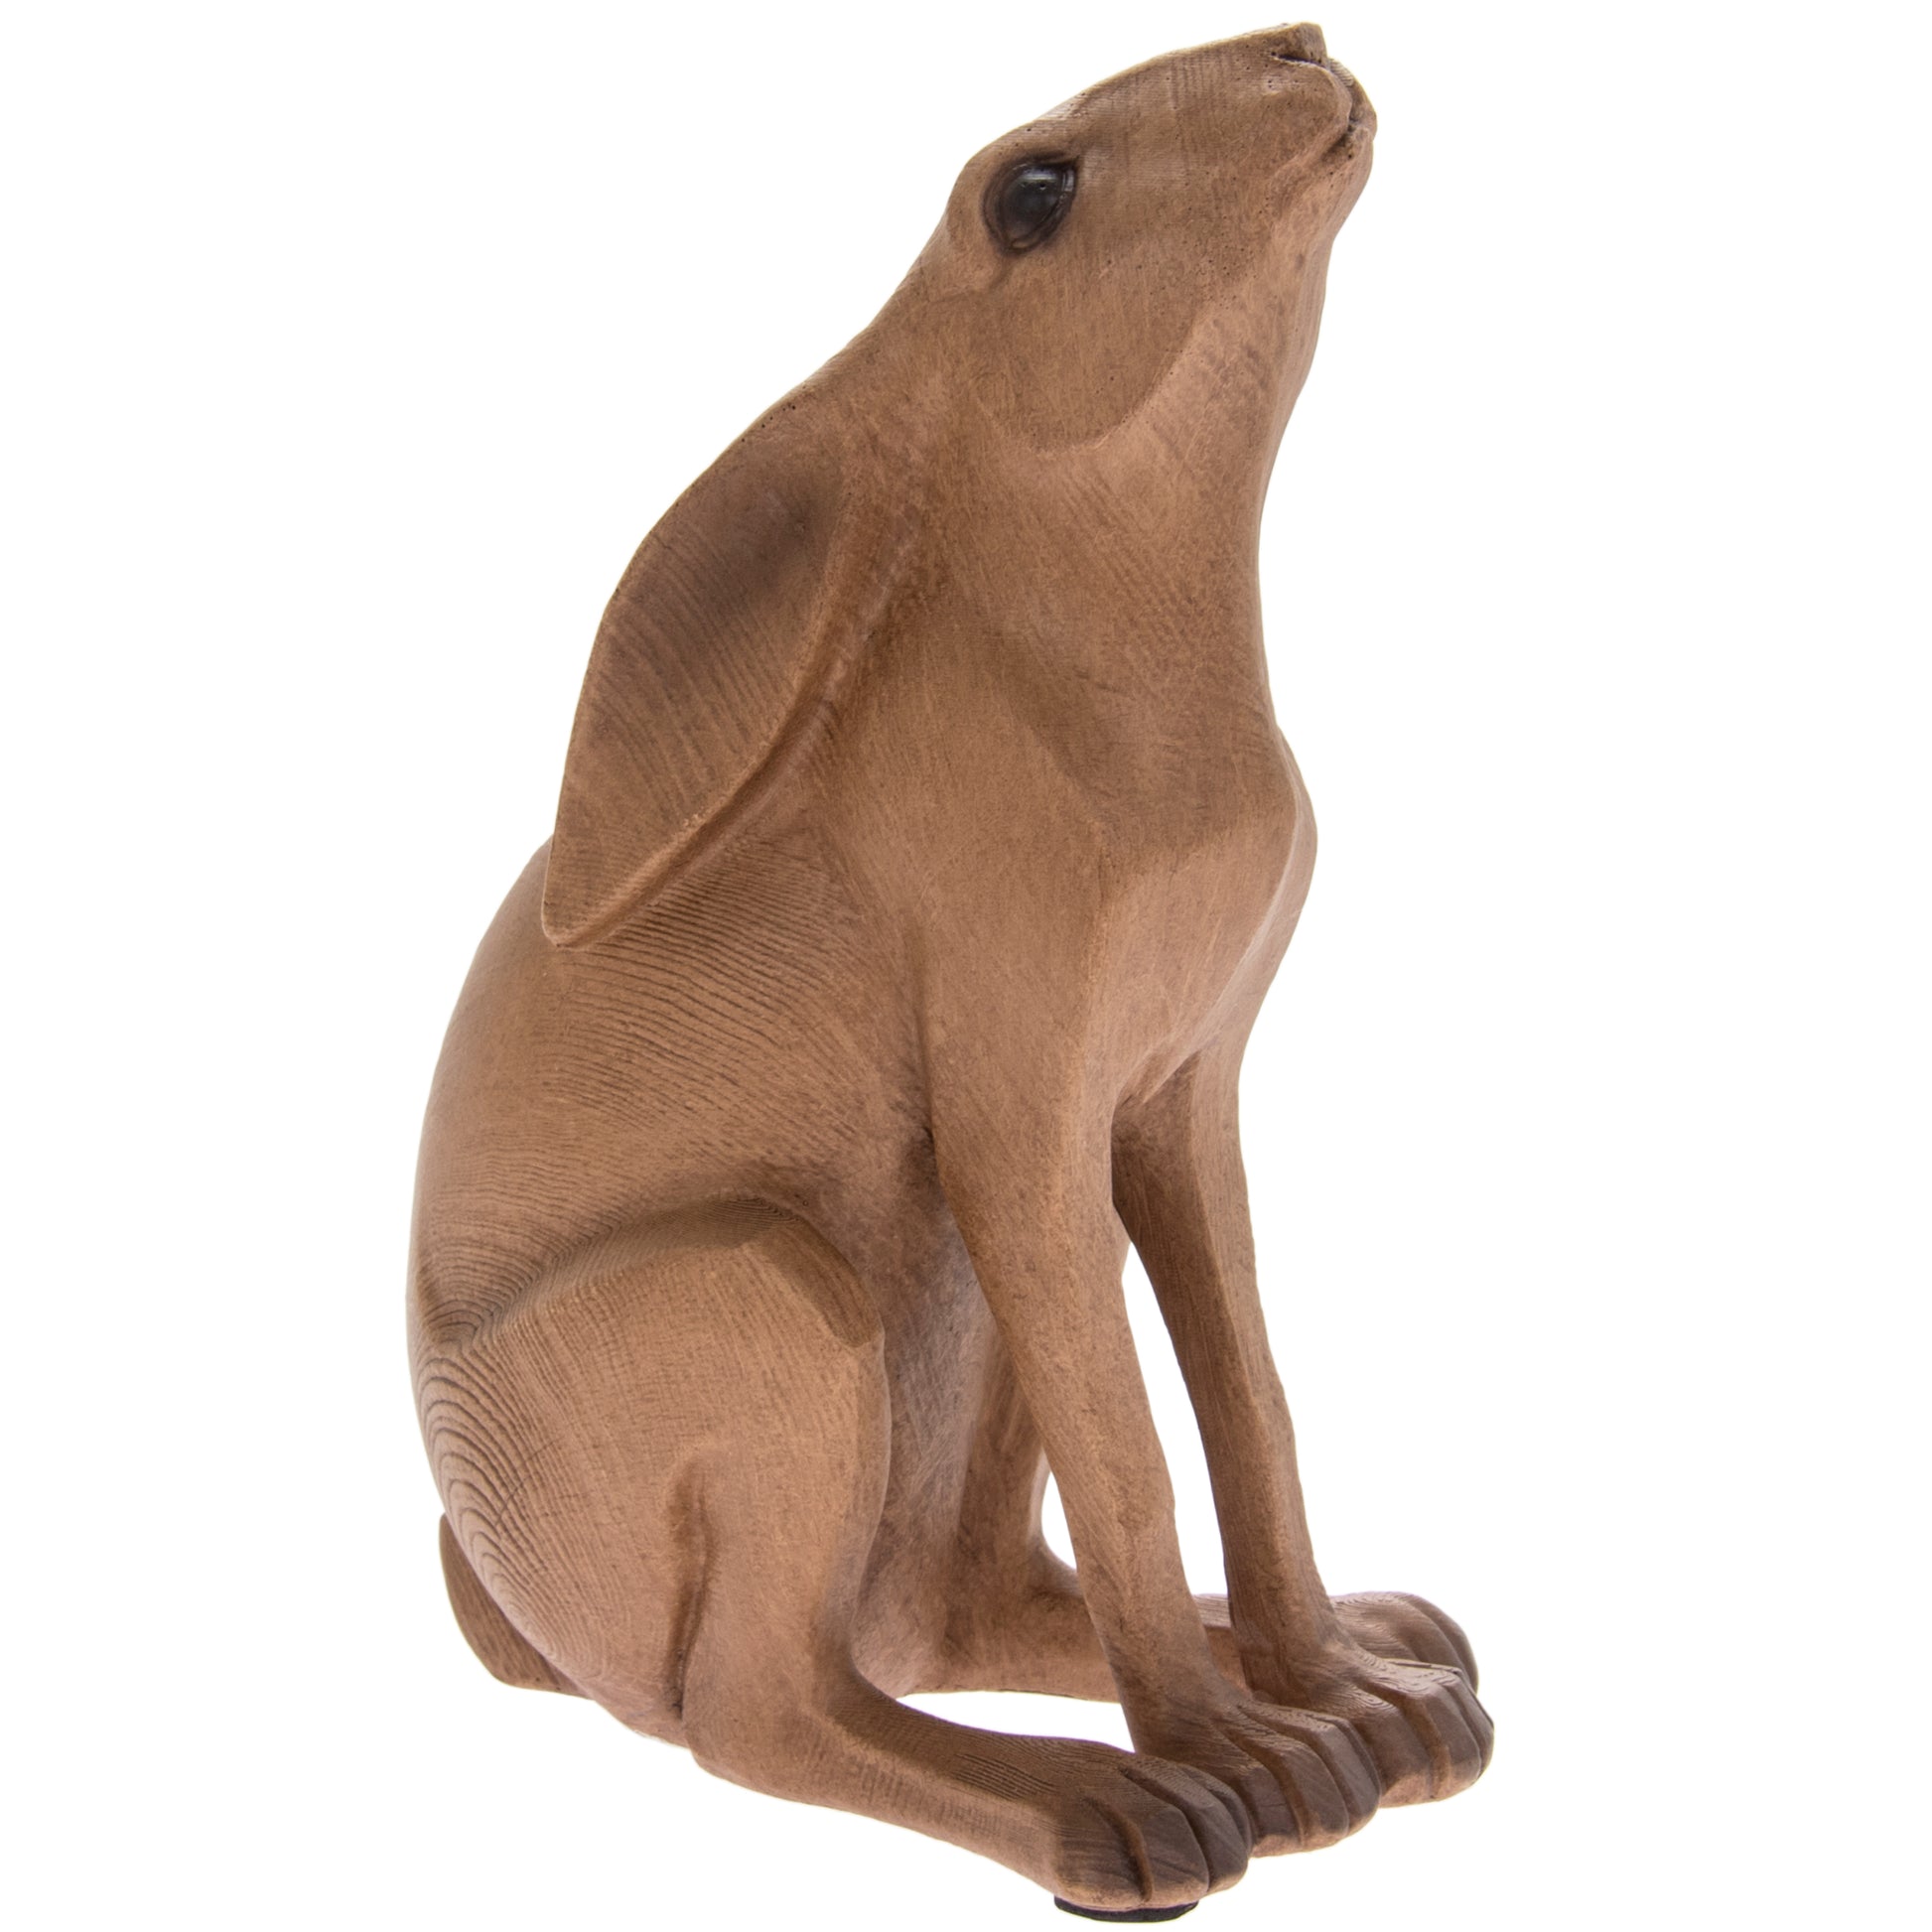 Carved Wooden Effect Sitting Hare Ornament